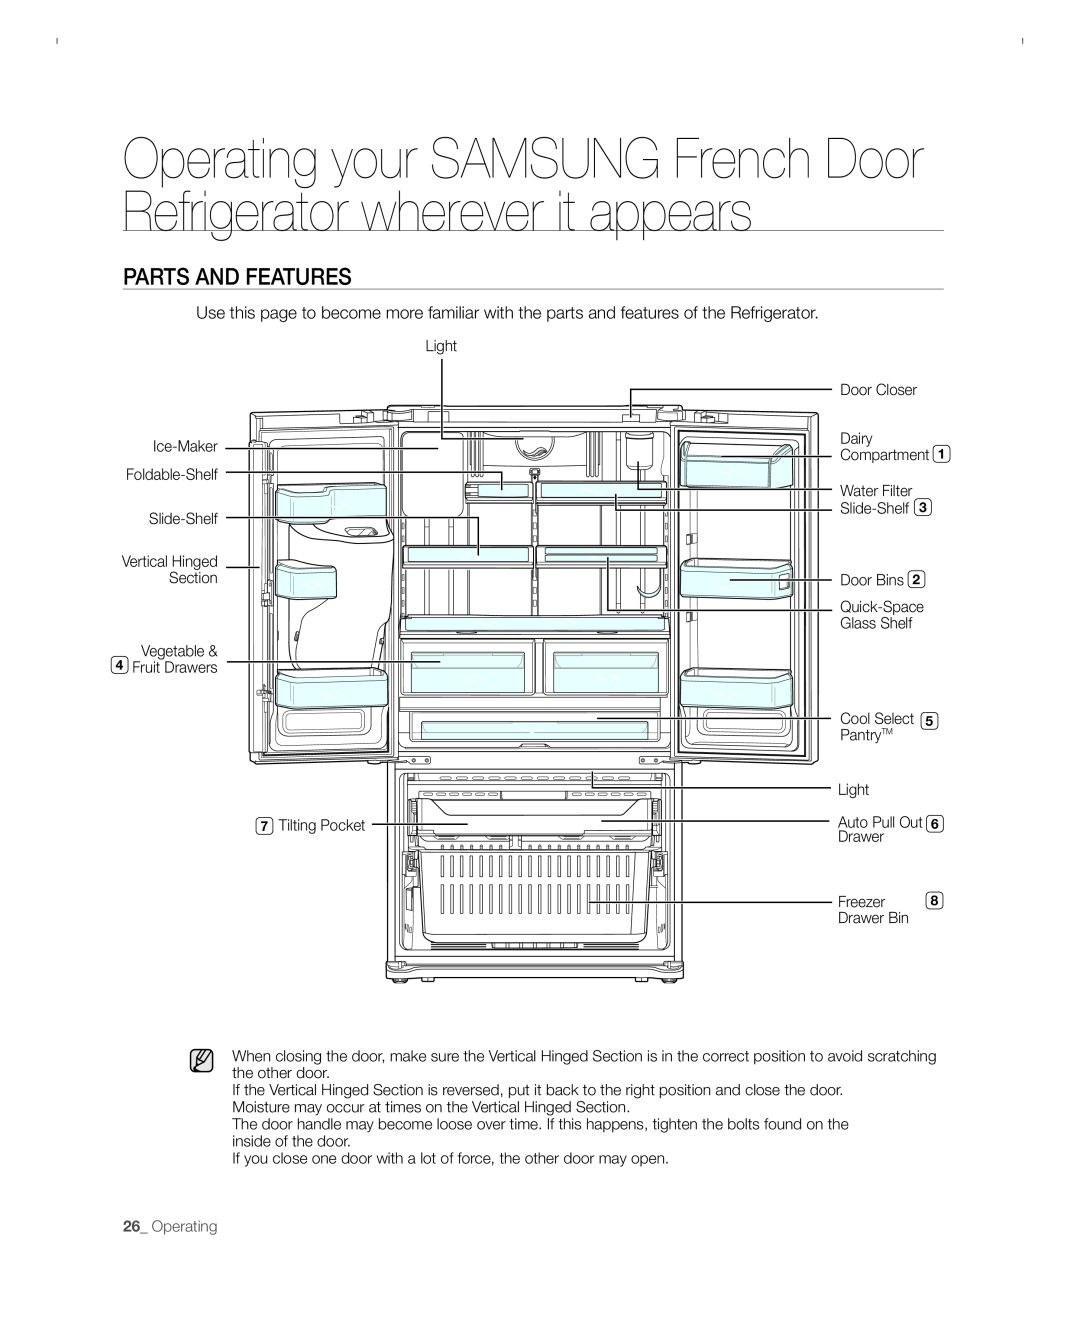 Samsung RFG297ACBP Parts And Features, Operating your SAMSUNG French Door Refrigerator wherever it appears, Slide-Shelf 